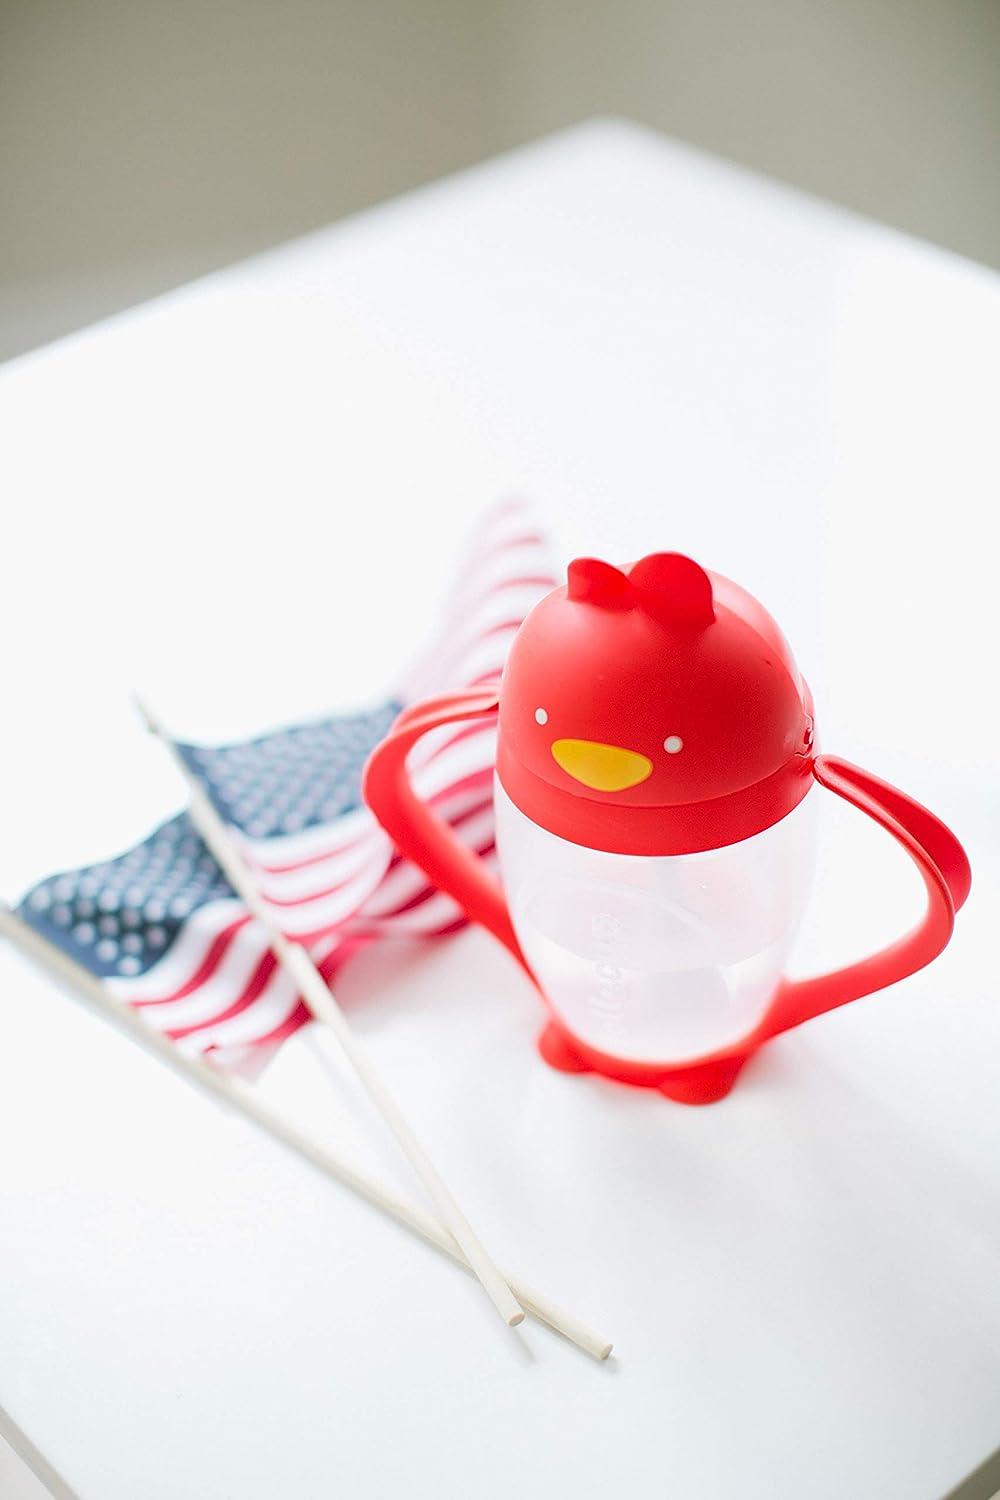 Lollacup: Weighted Straw Sippy Cup - Made in USA - As seen on Shark Tank! –  lollaland